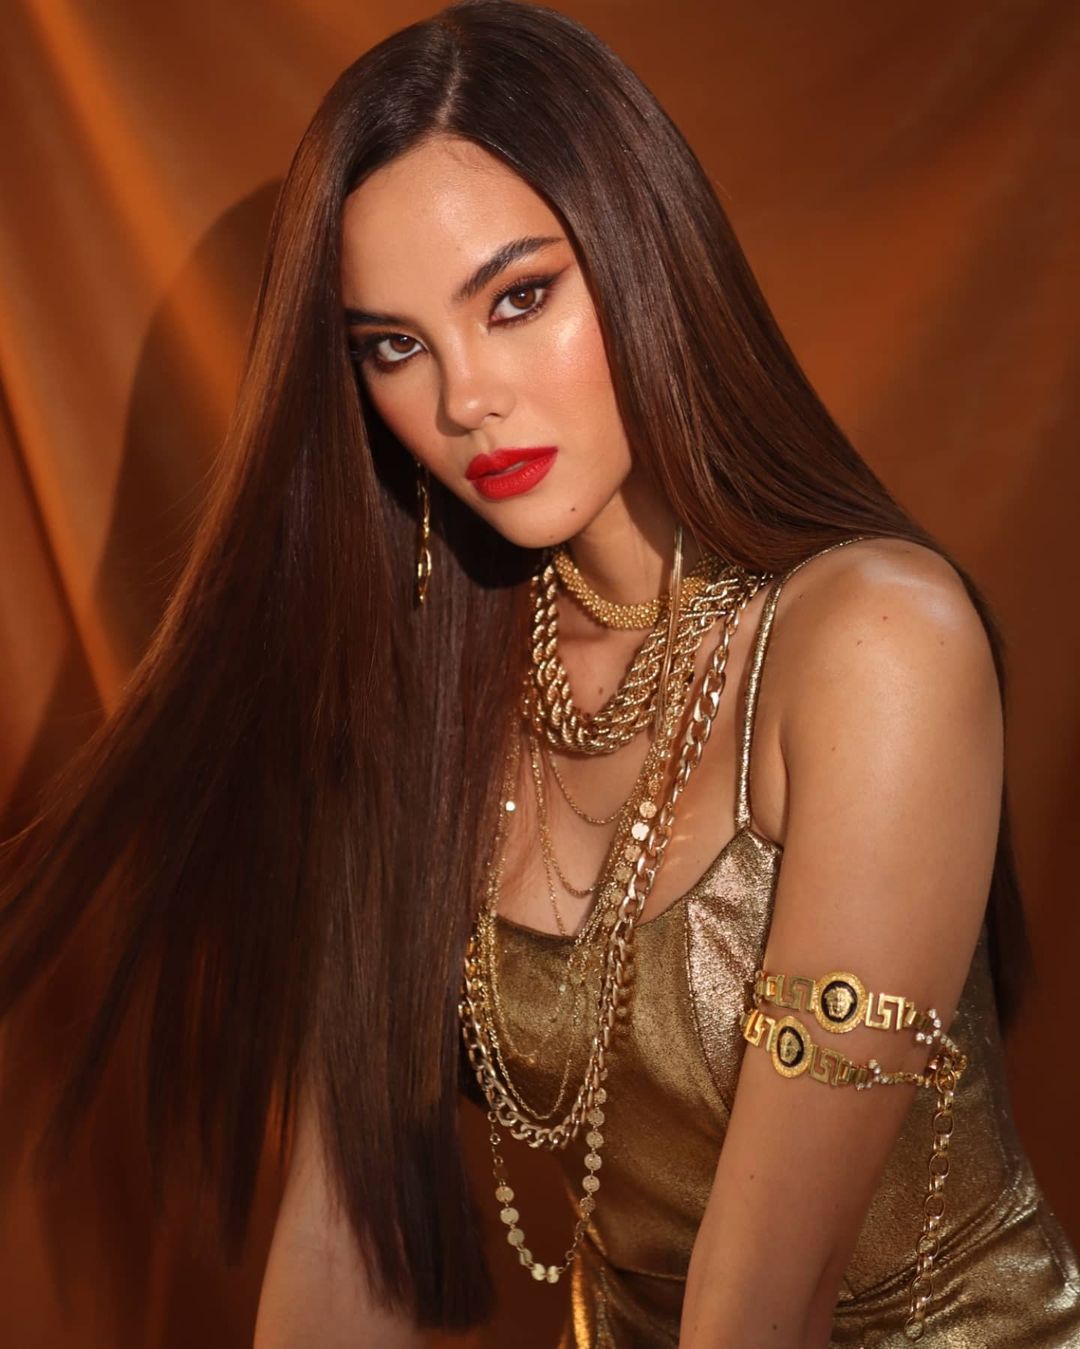 Catriona Gray hosts Miss South Africa pageant